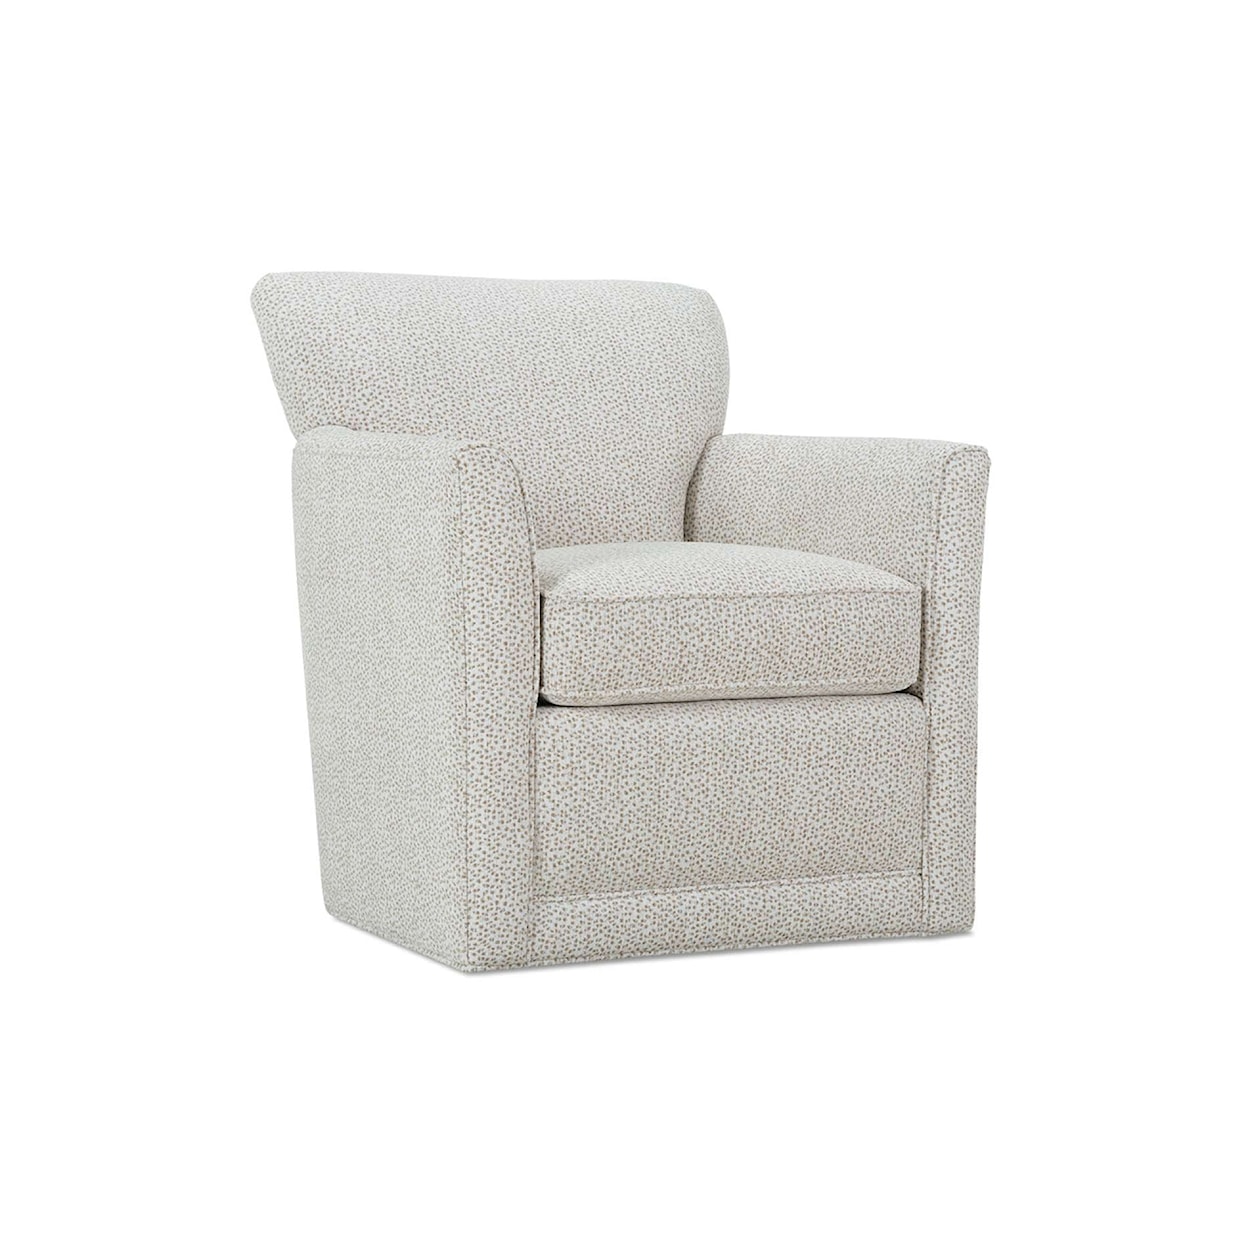 Rowe Times Square Swivel Glider